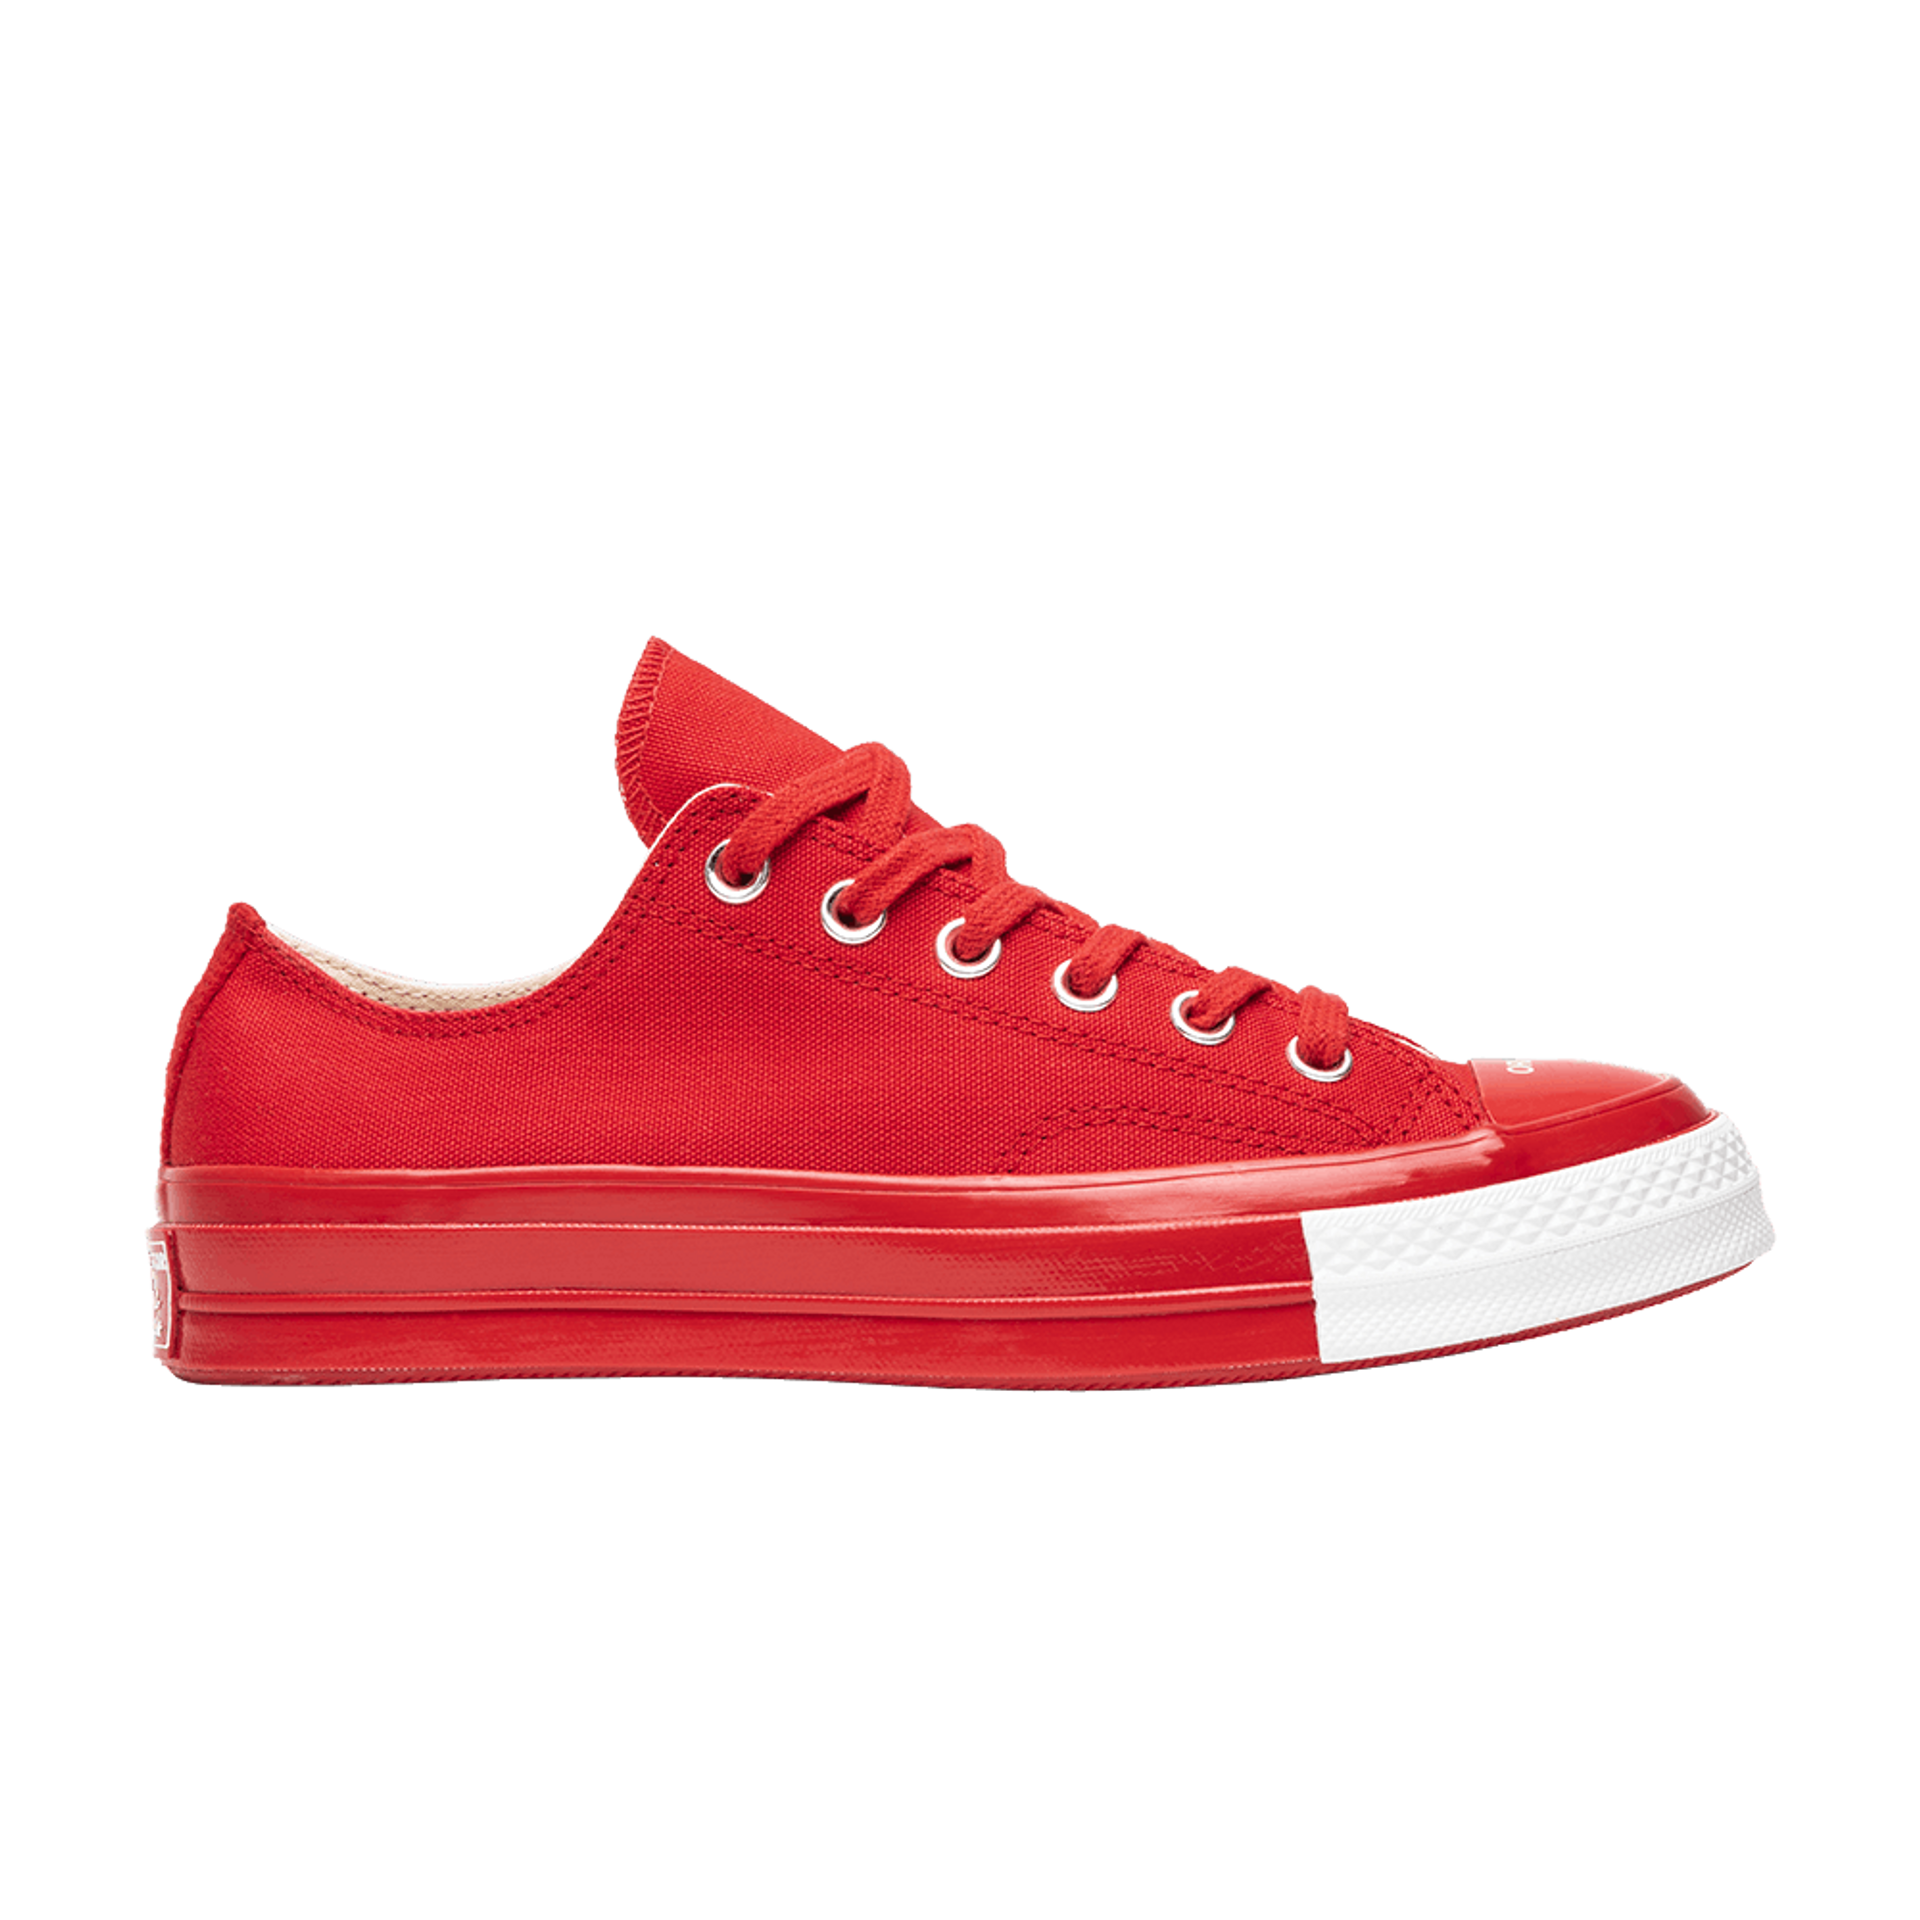 Undercover x Chuck 70 Low 'Order and Disorder' - Red